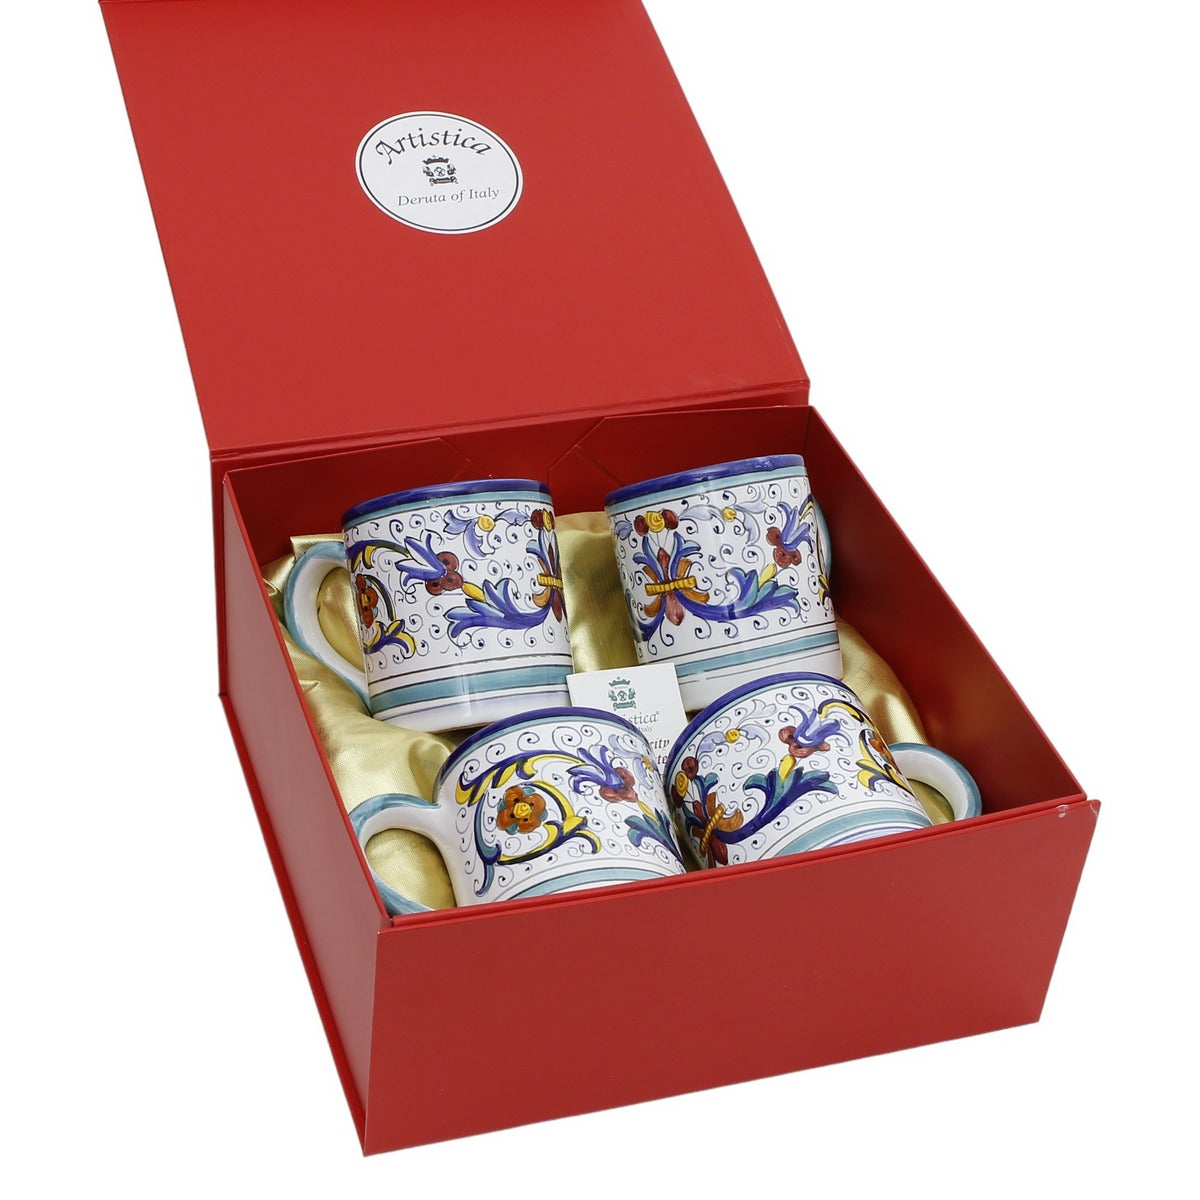 GIFT BOX: DeLuxe Glossy Red Gift Box with Vecchia Deruta Lite Mugs 10 Oz. (Set of 4 pcs)